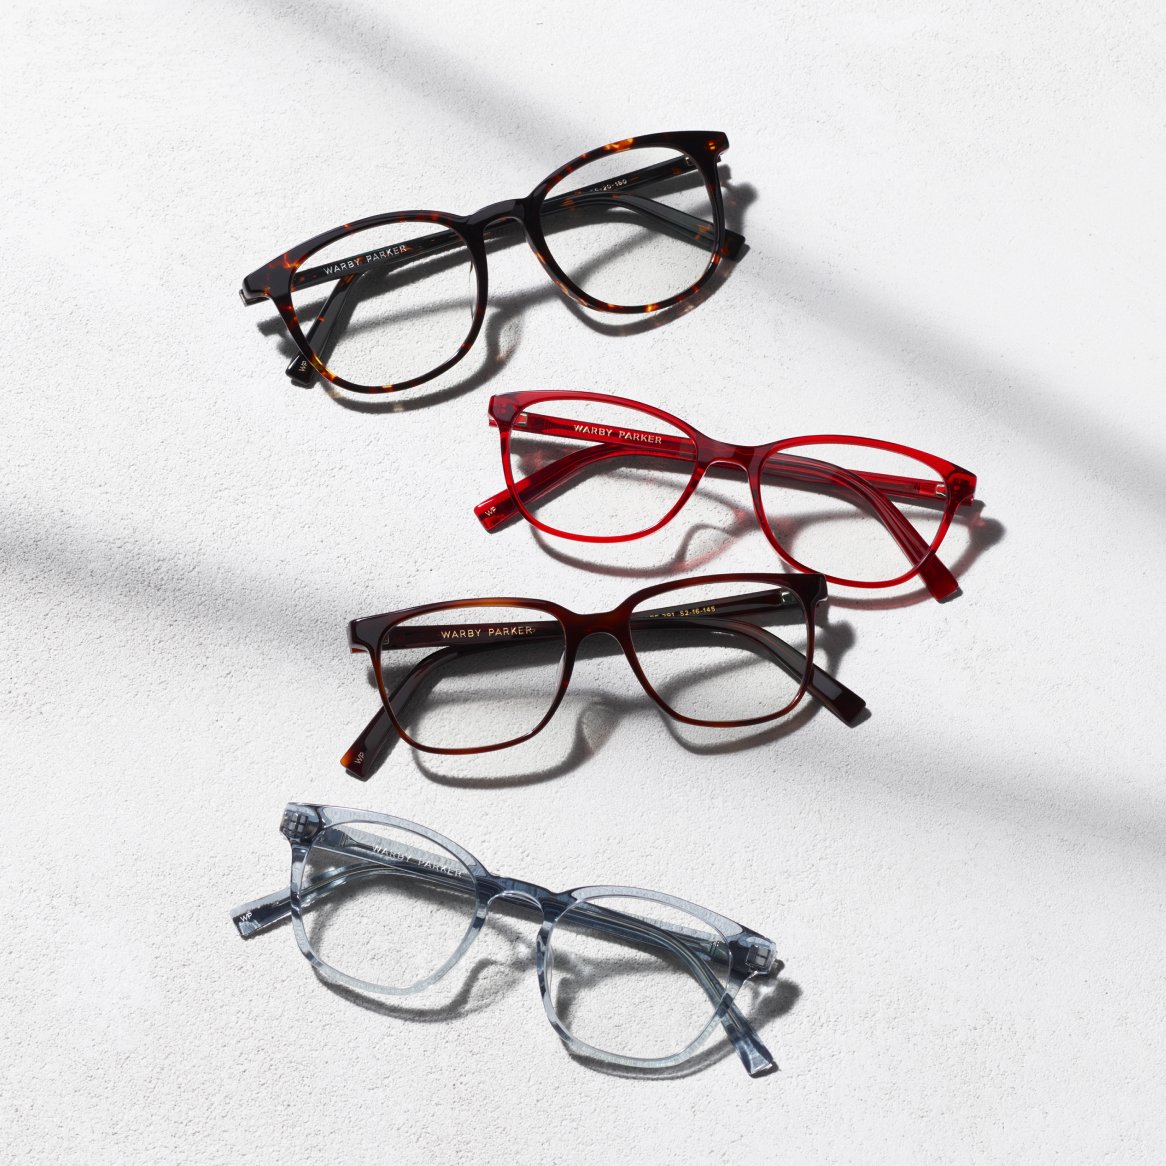 Several different styles of glasses frames